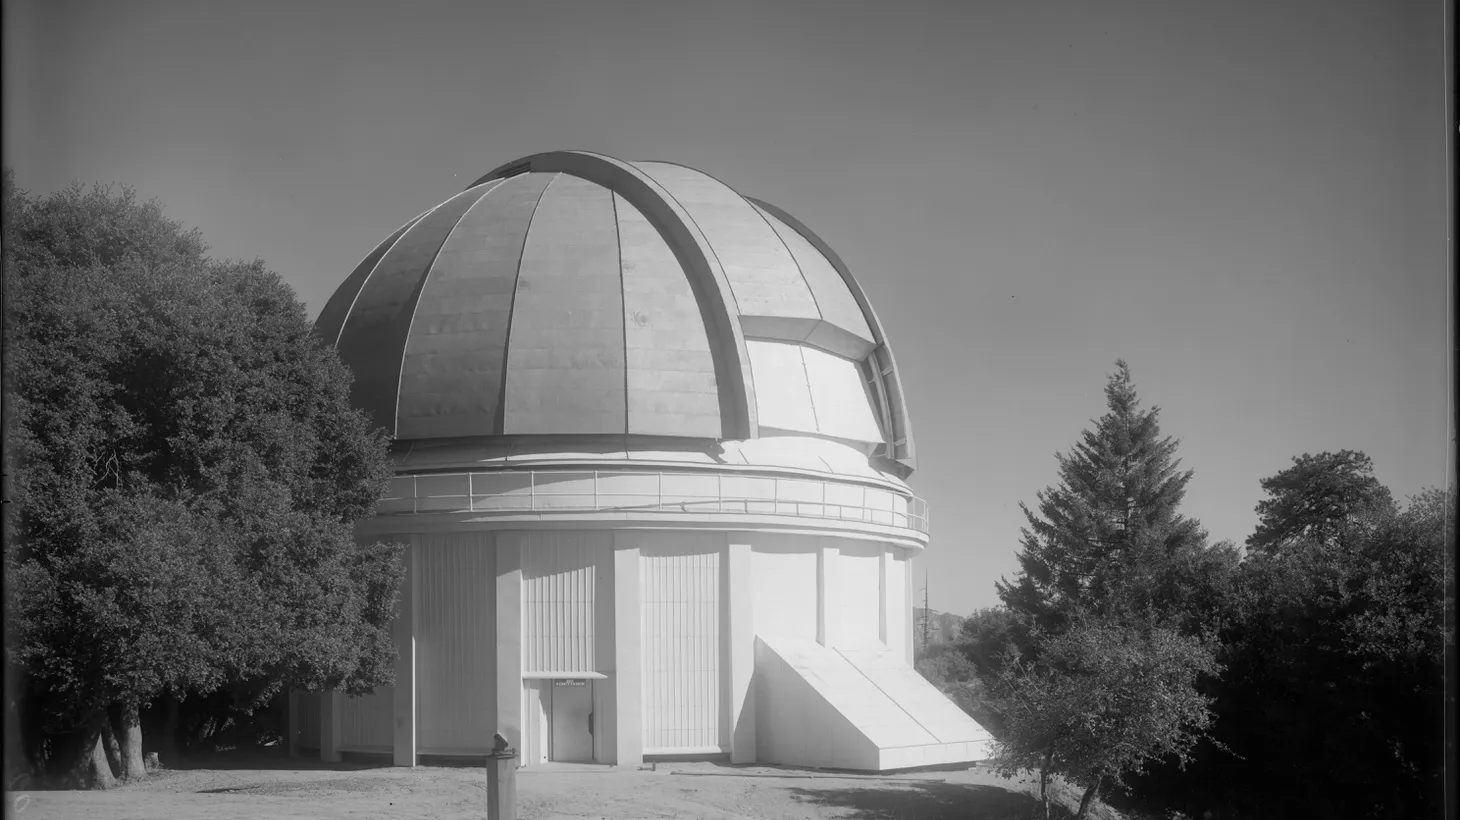 The home dome of the 60-inch telescope has stayed the same since 1914.